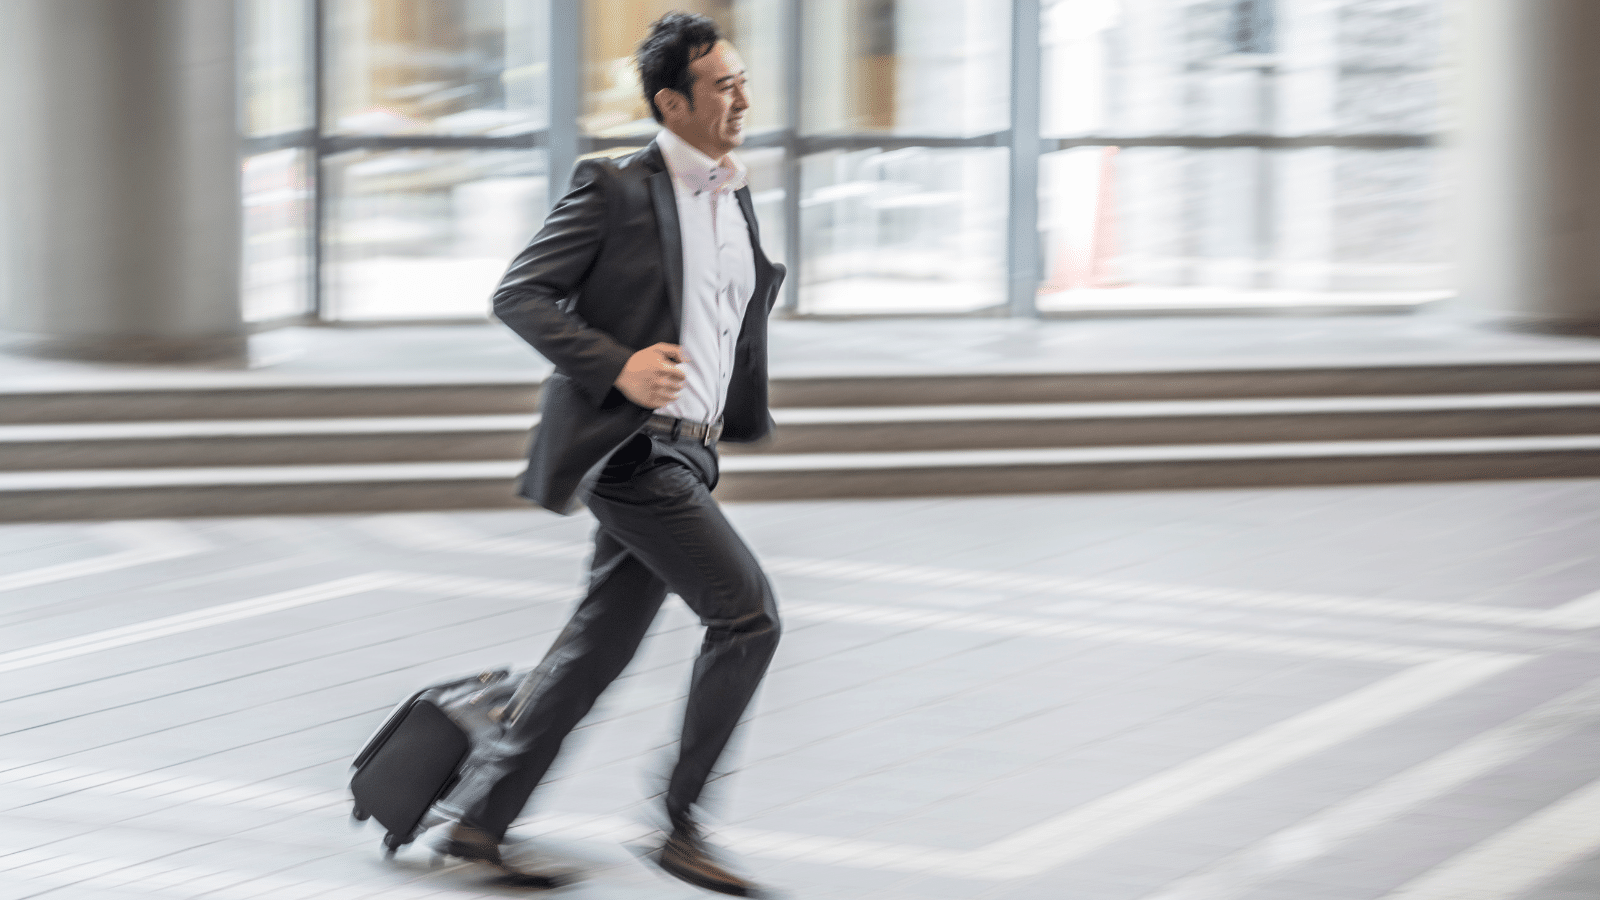 Businessman in suit running down a street